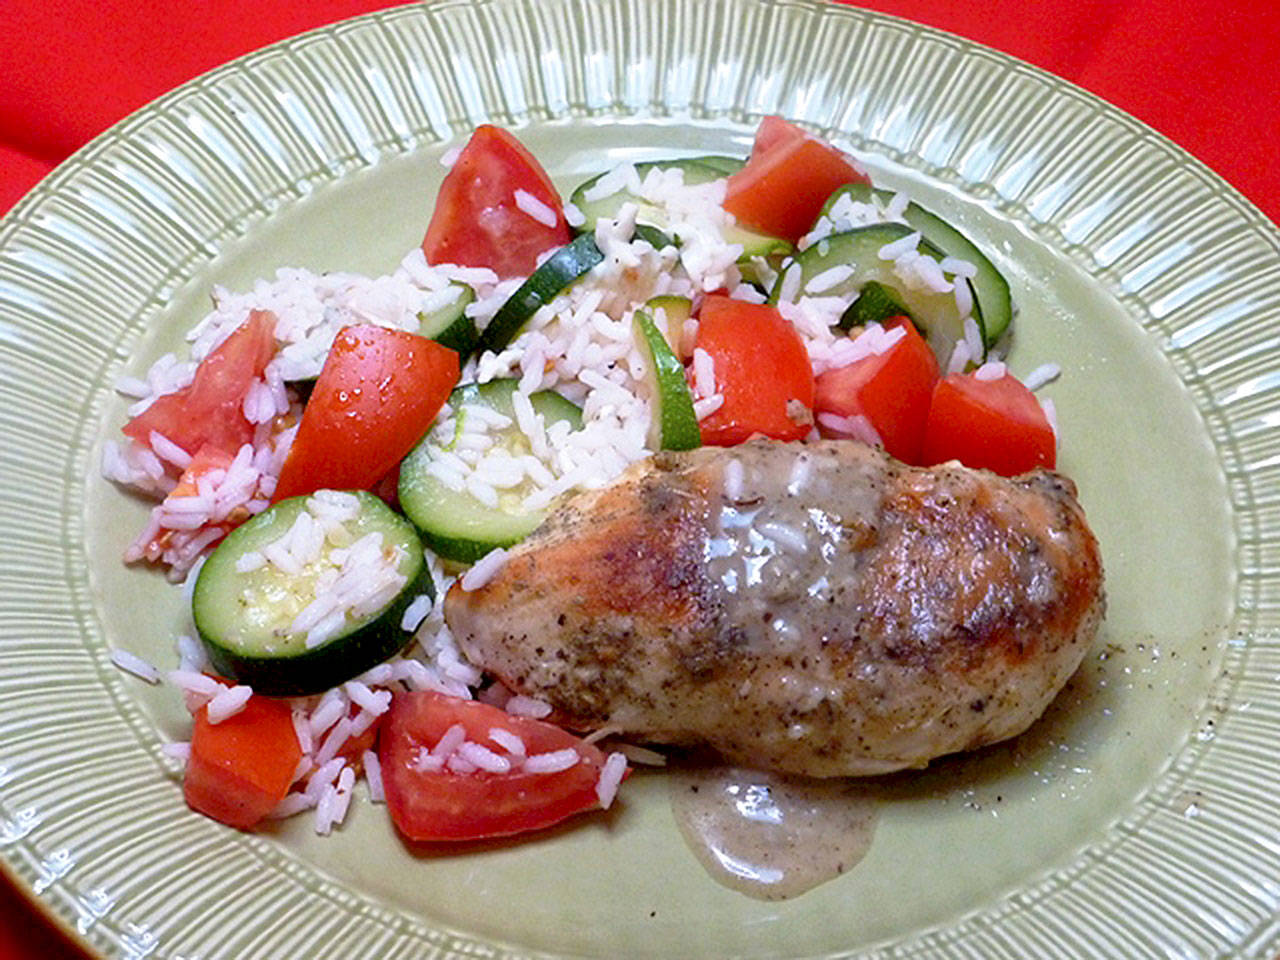 This quick-fix recipe flavors chicken breasts with sage and vermouth. (Linda Gassenheimer)